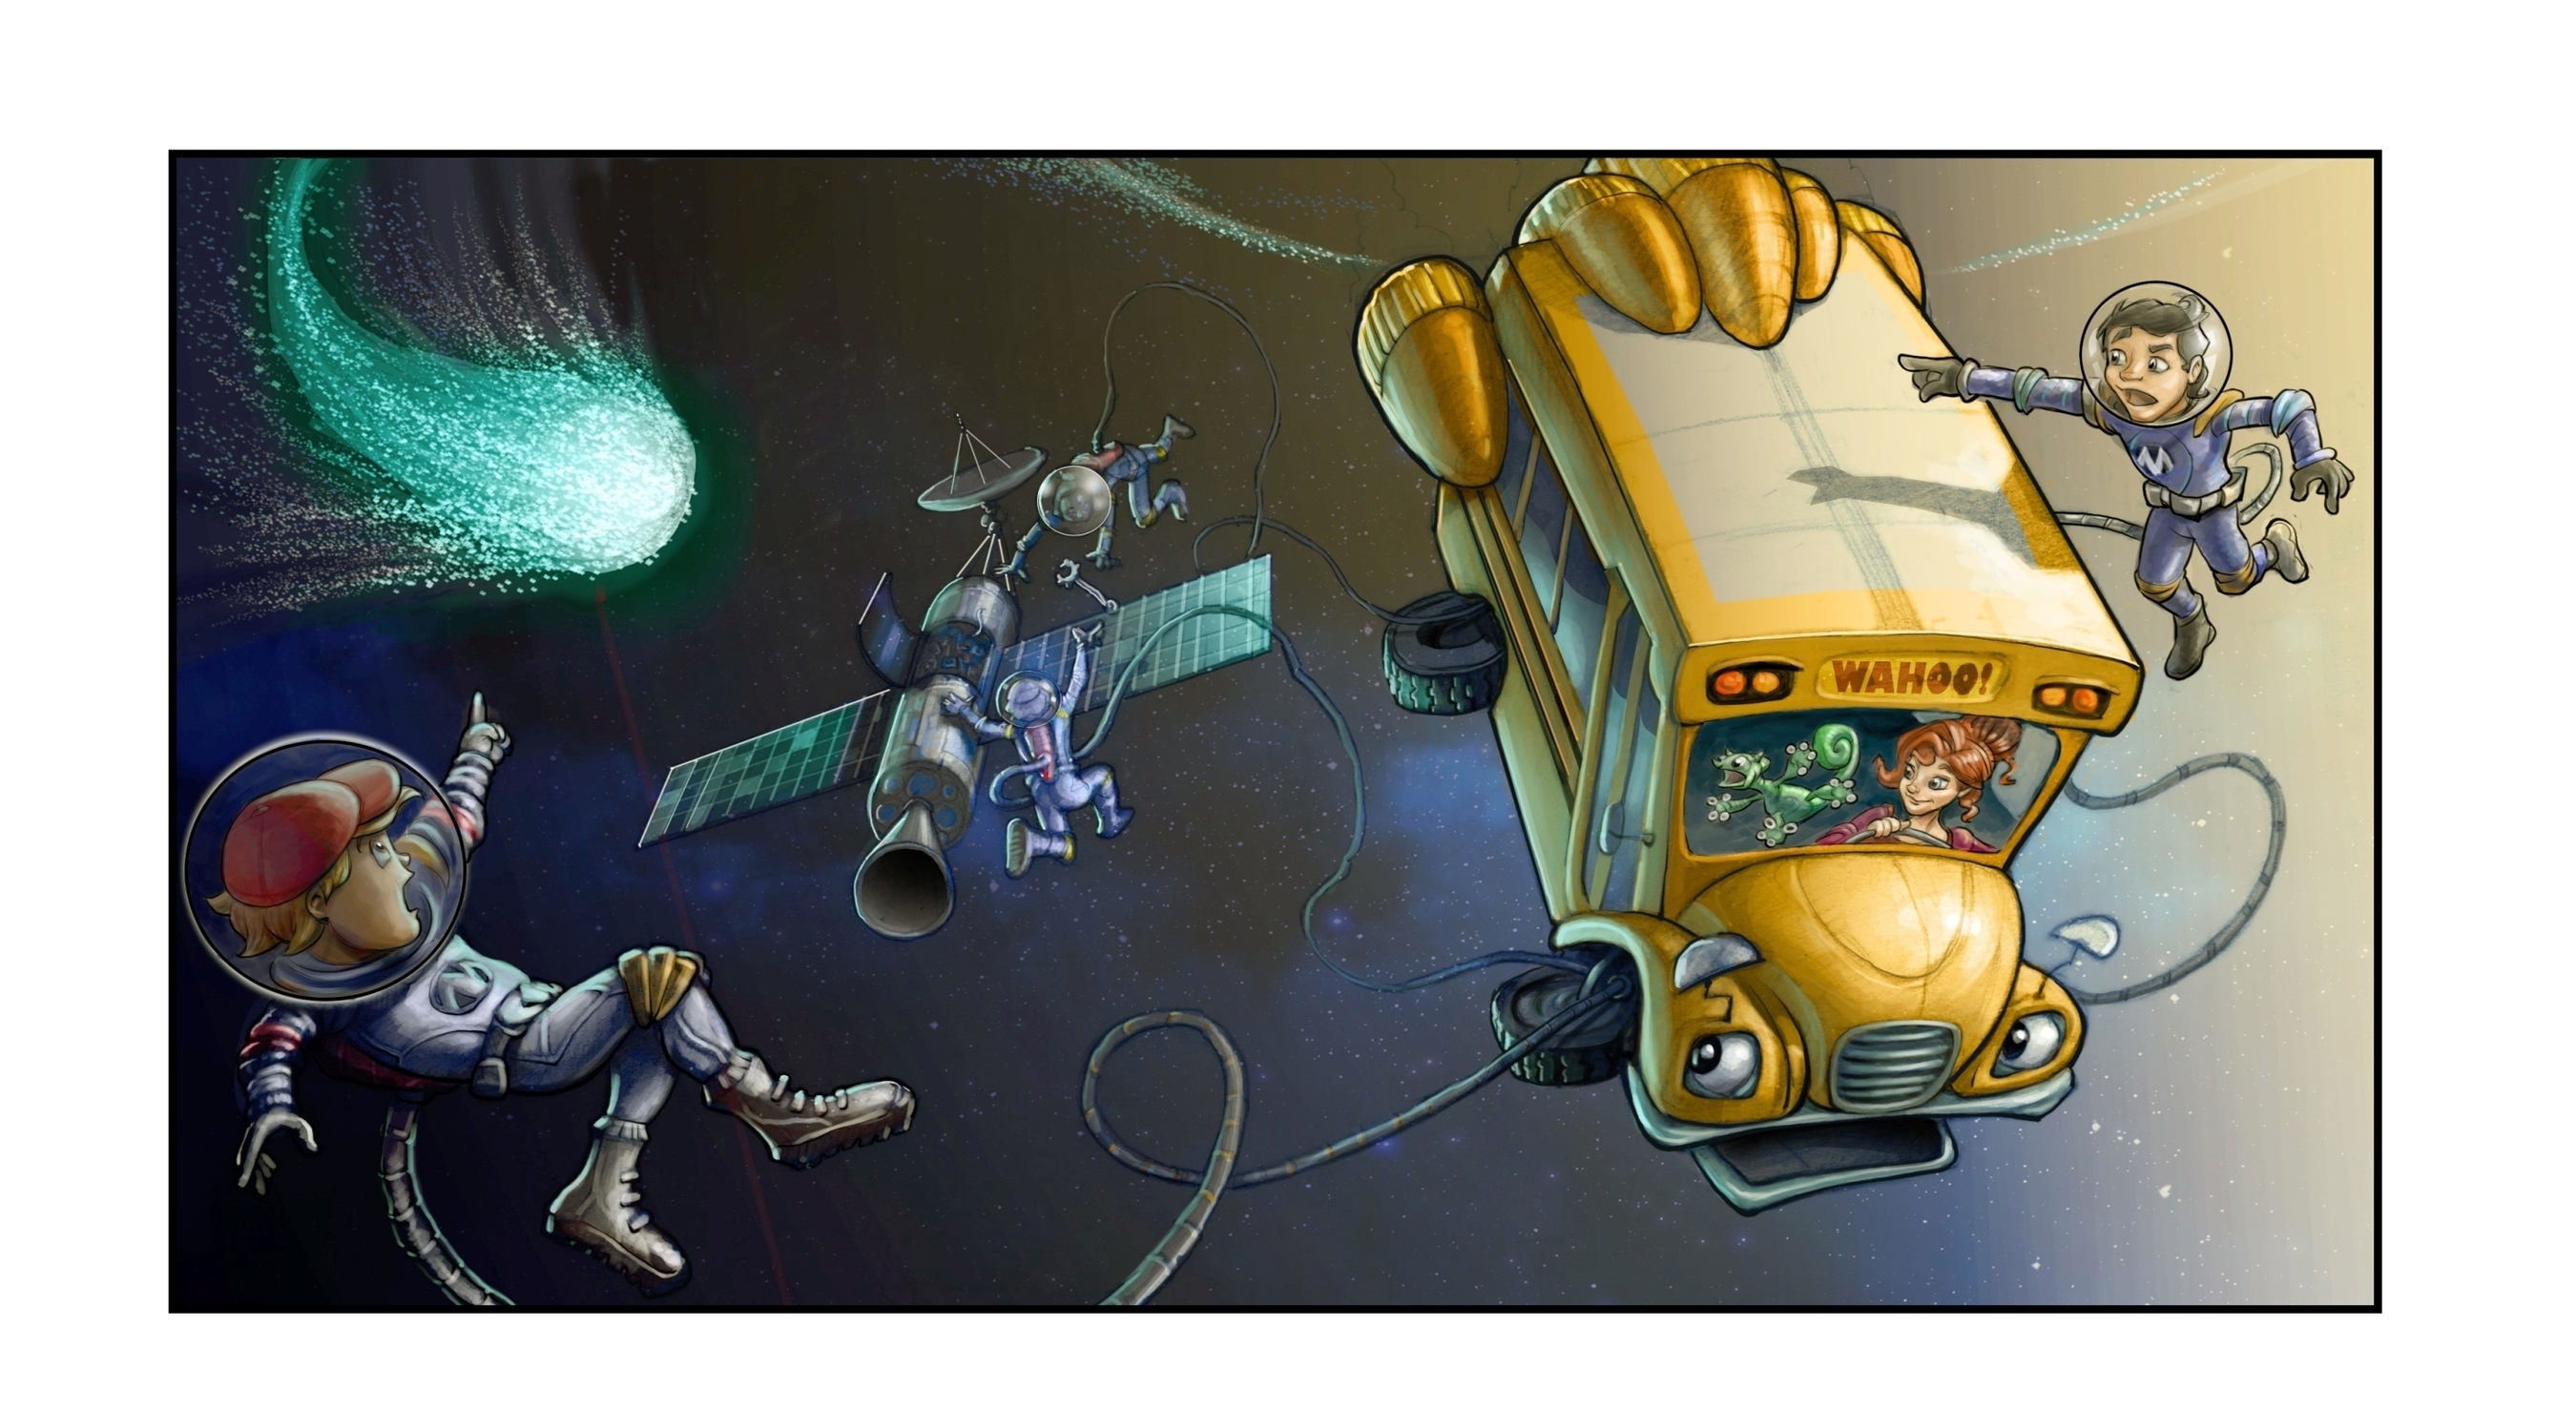 Early concept art for The Magic School Bus 360 degrees, an original new CG animated TV series from Scholastic Media, launching on Netflix in 2016. The series will be a dynamic reimagining of Scholastic Media’s groundbreaking and iconic The Magic School Bus, which revolutionized kids’ television starting in the 1990s. Early Concept Art © Scholastic Entertainment Inc 2014 All Rights Reserved. (PRNewsFoto/Netflix)